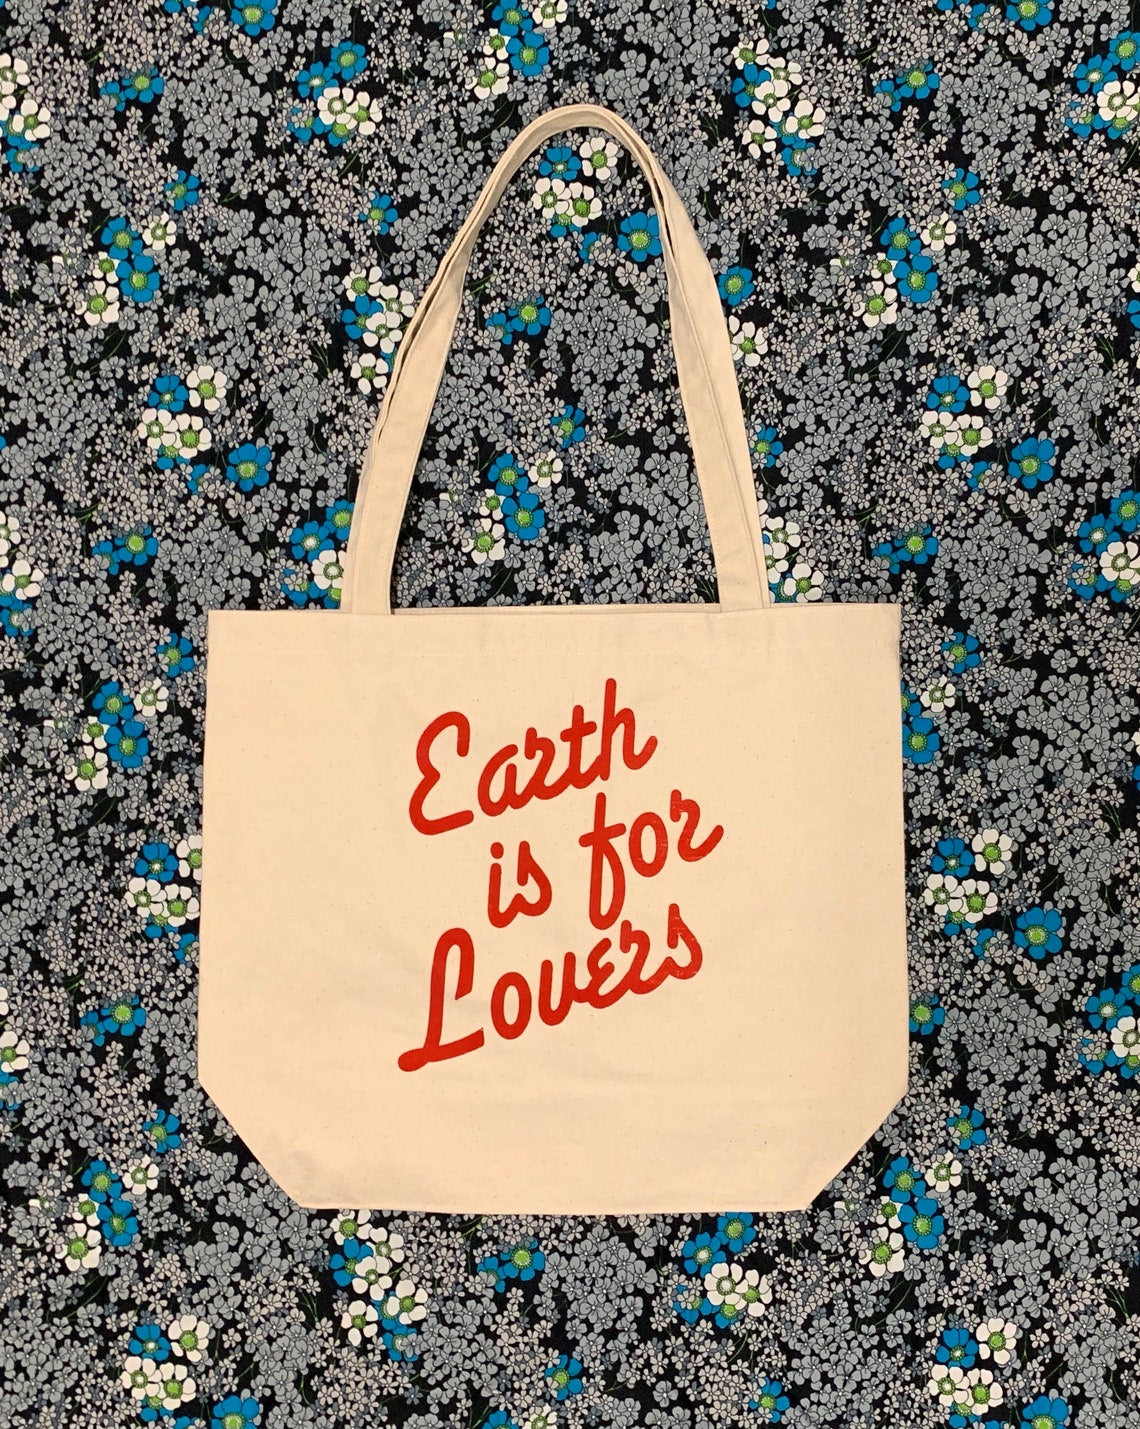 Stock image of “Earth is for Lovers” canvas tote bag.